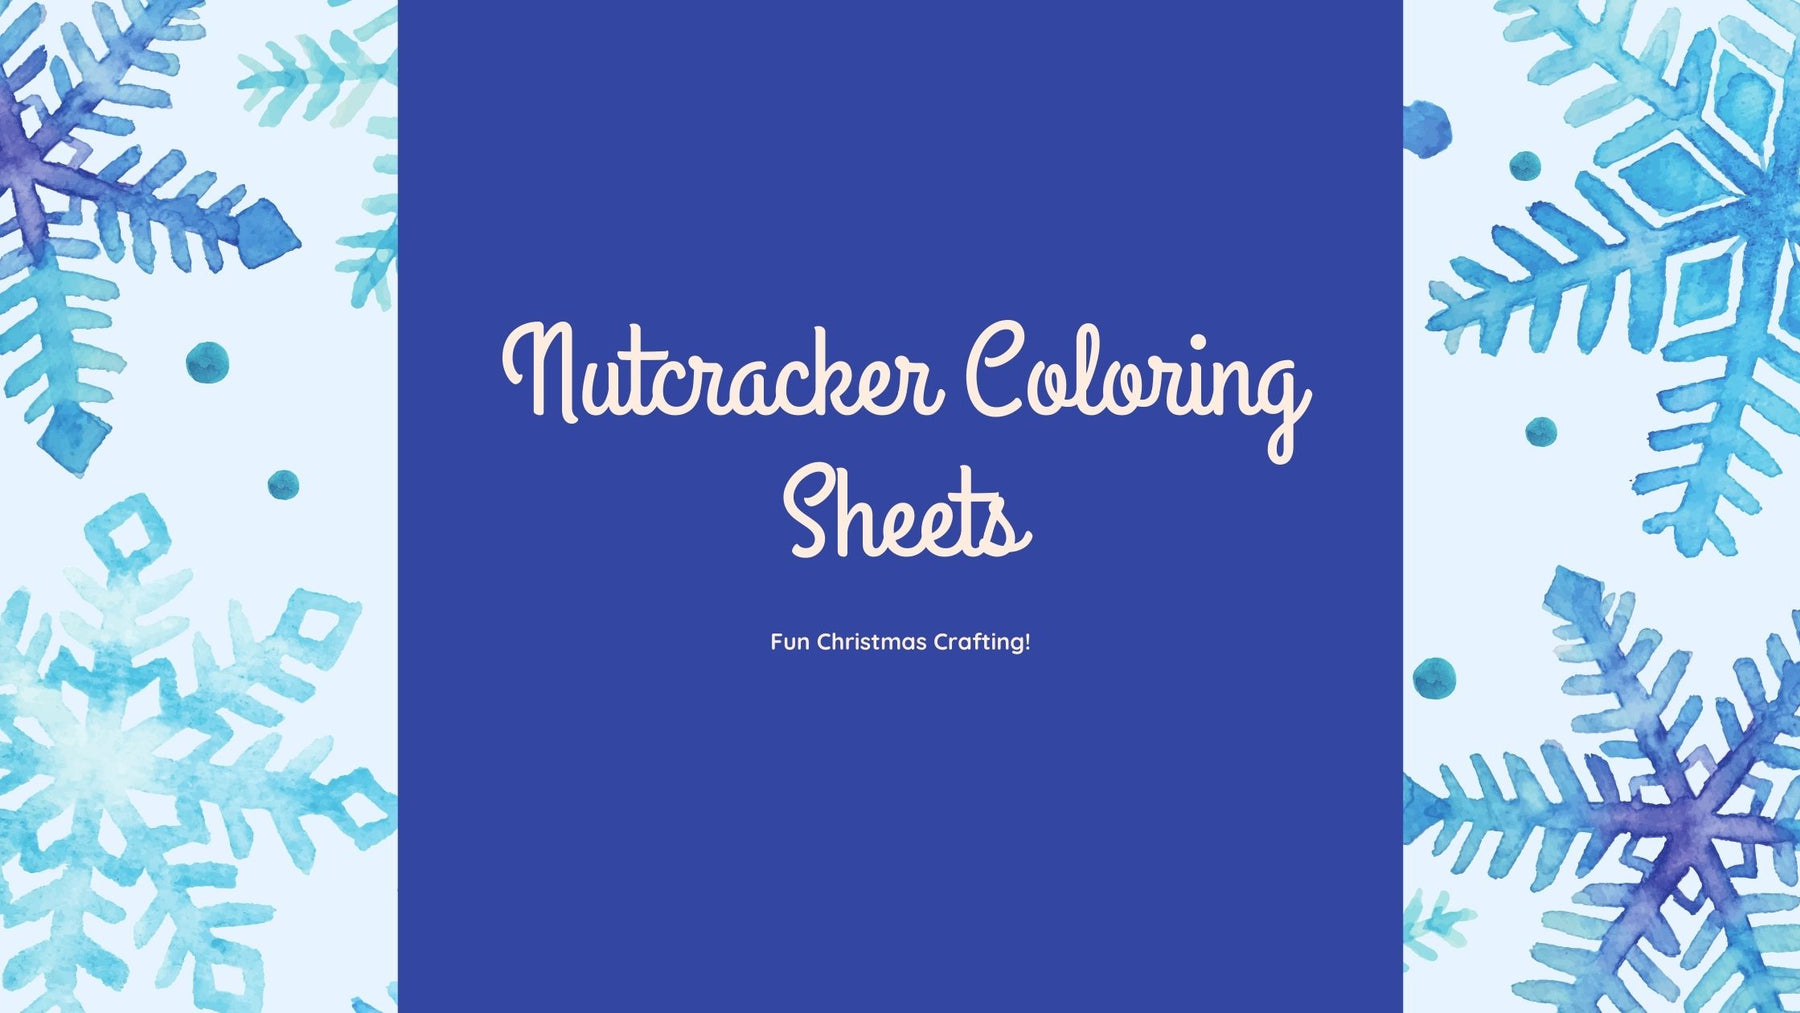 Nutcracker Coloring in Sheets! Christmas Crafting